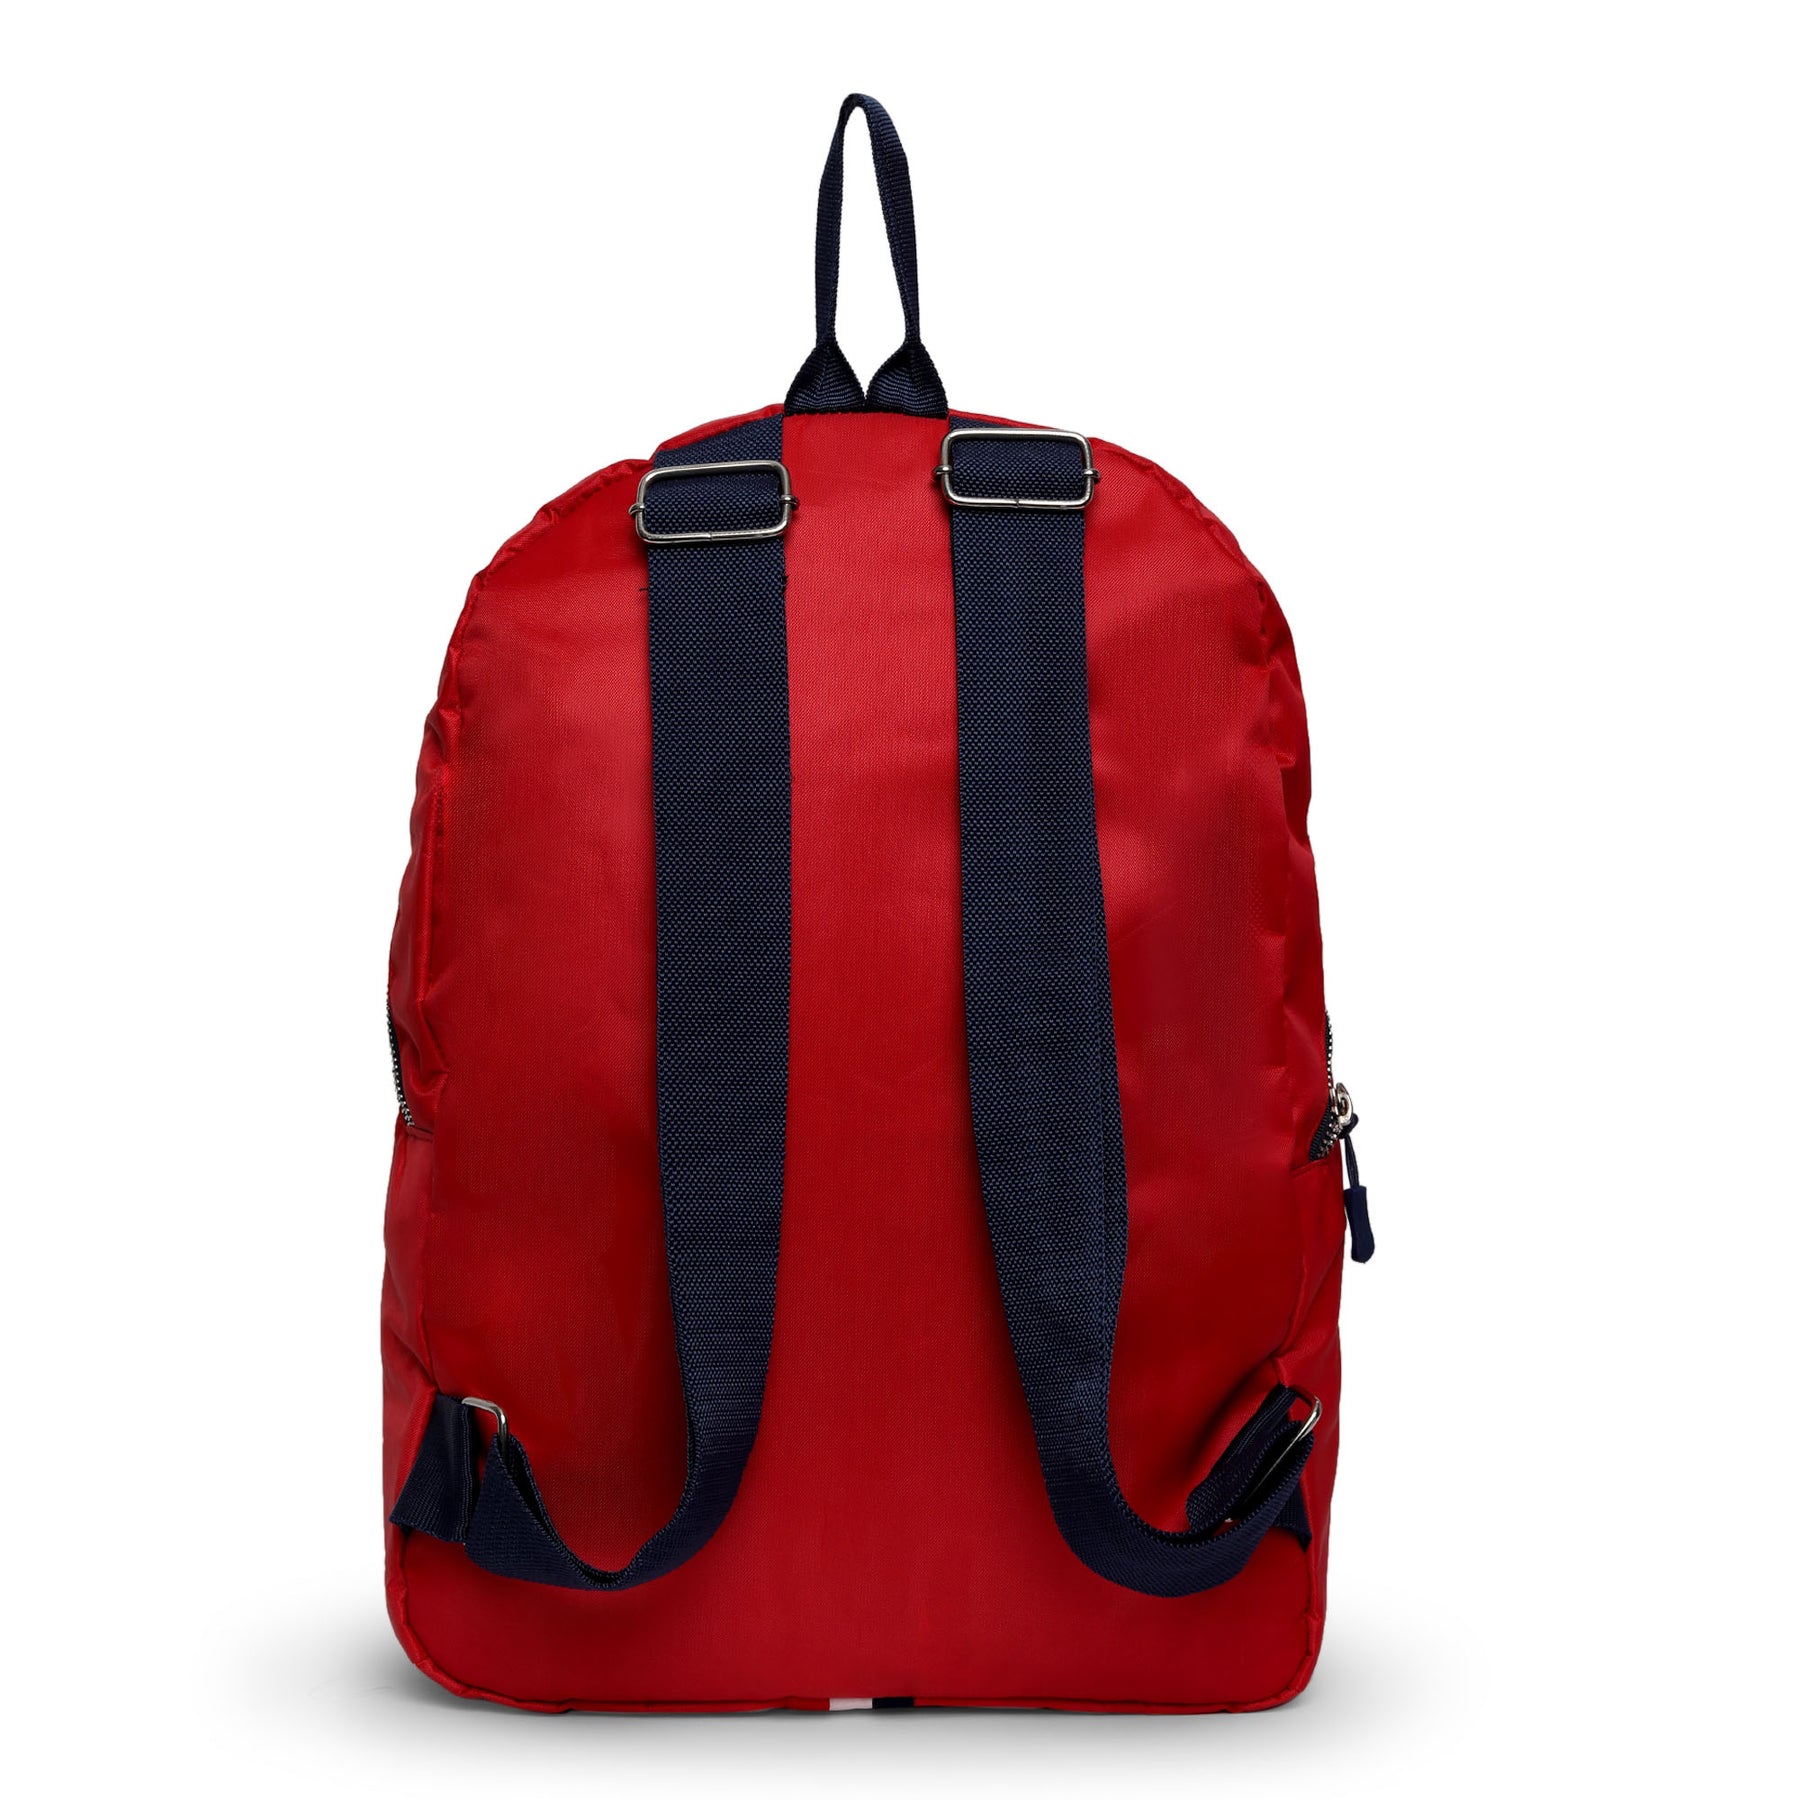 AMSWAN RED UNISEX BACKPACK